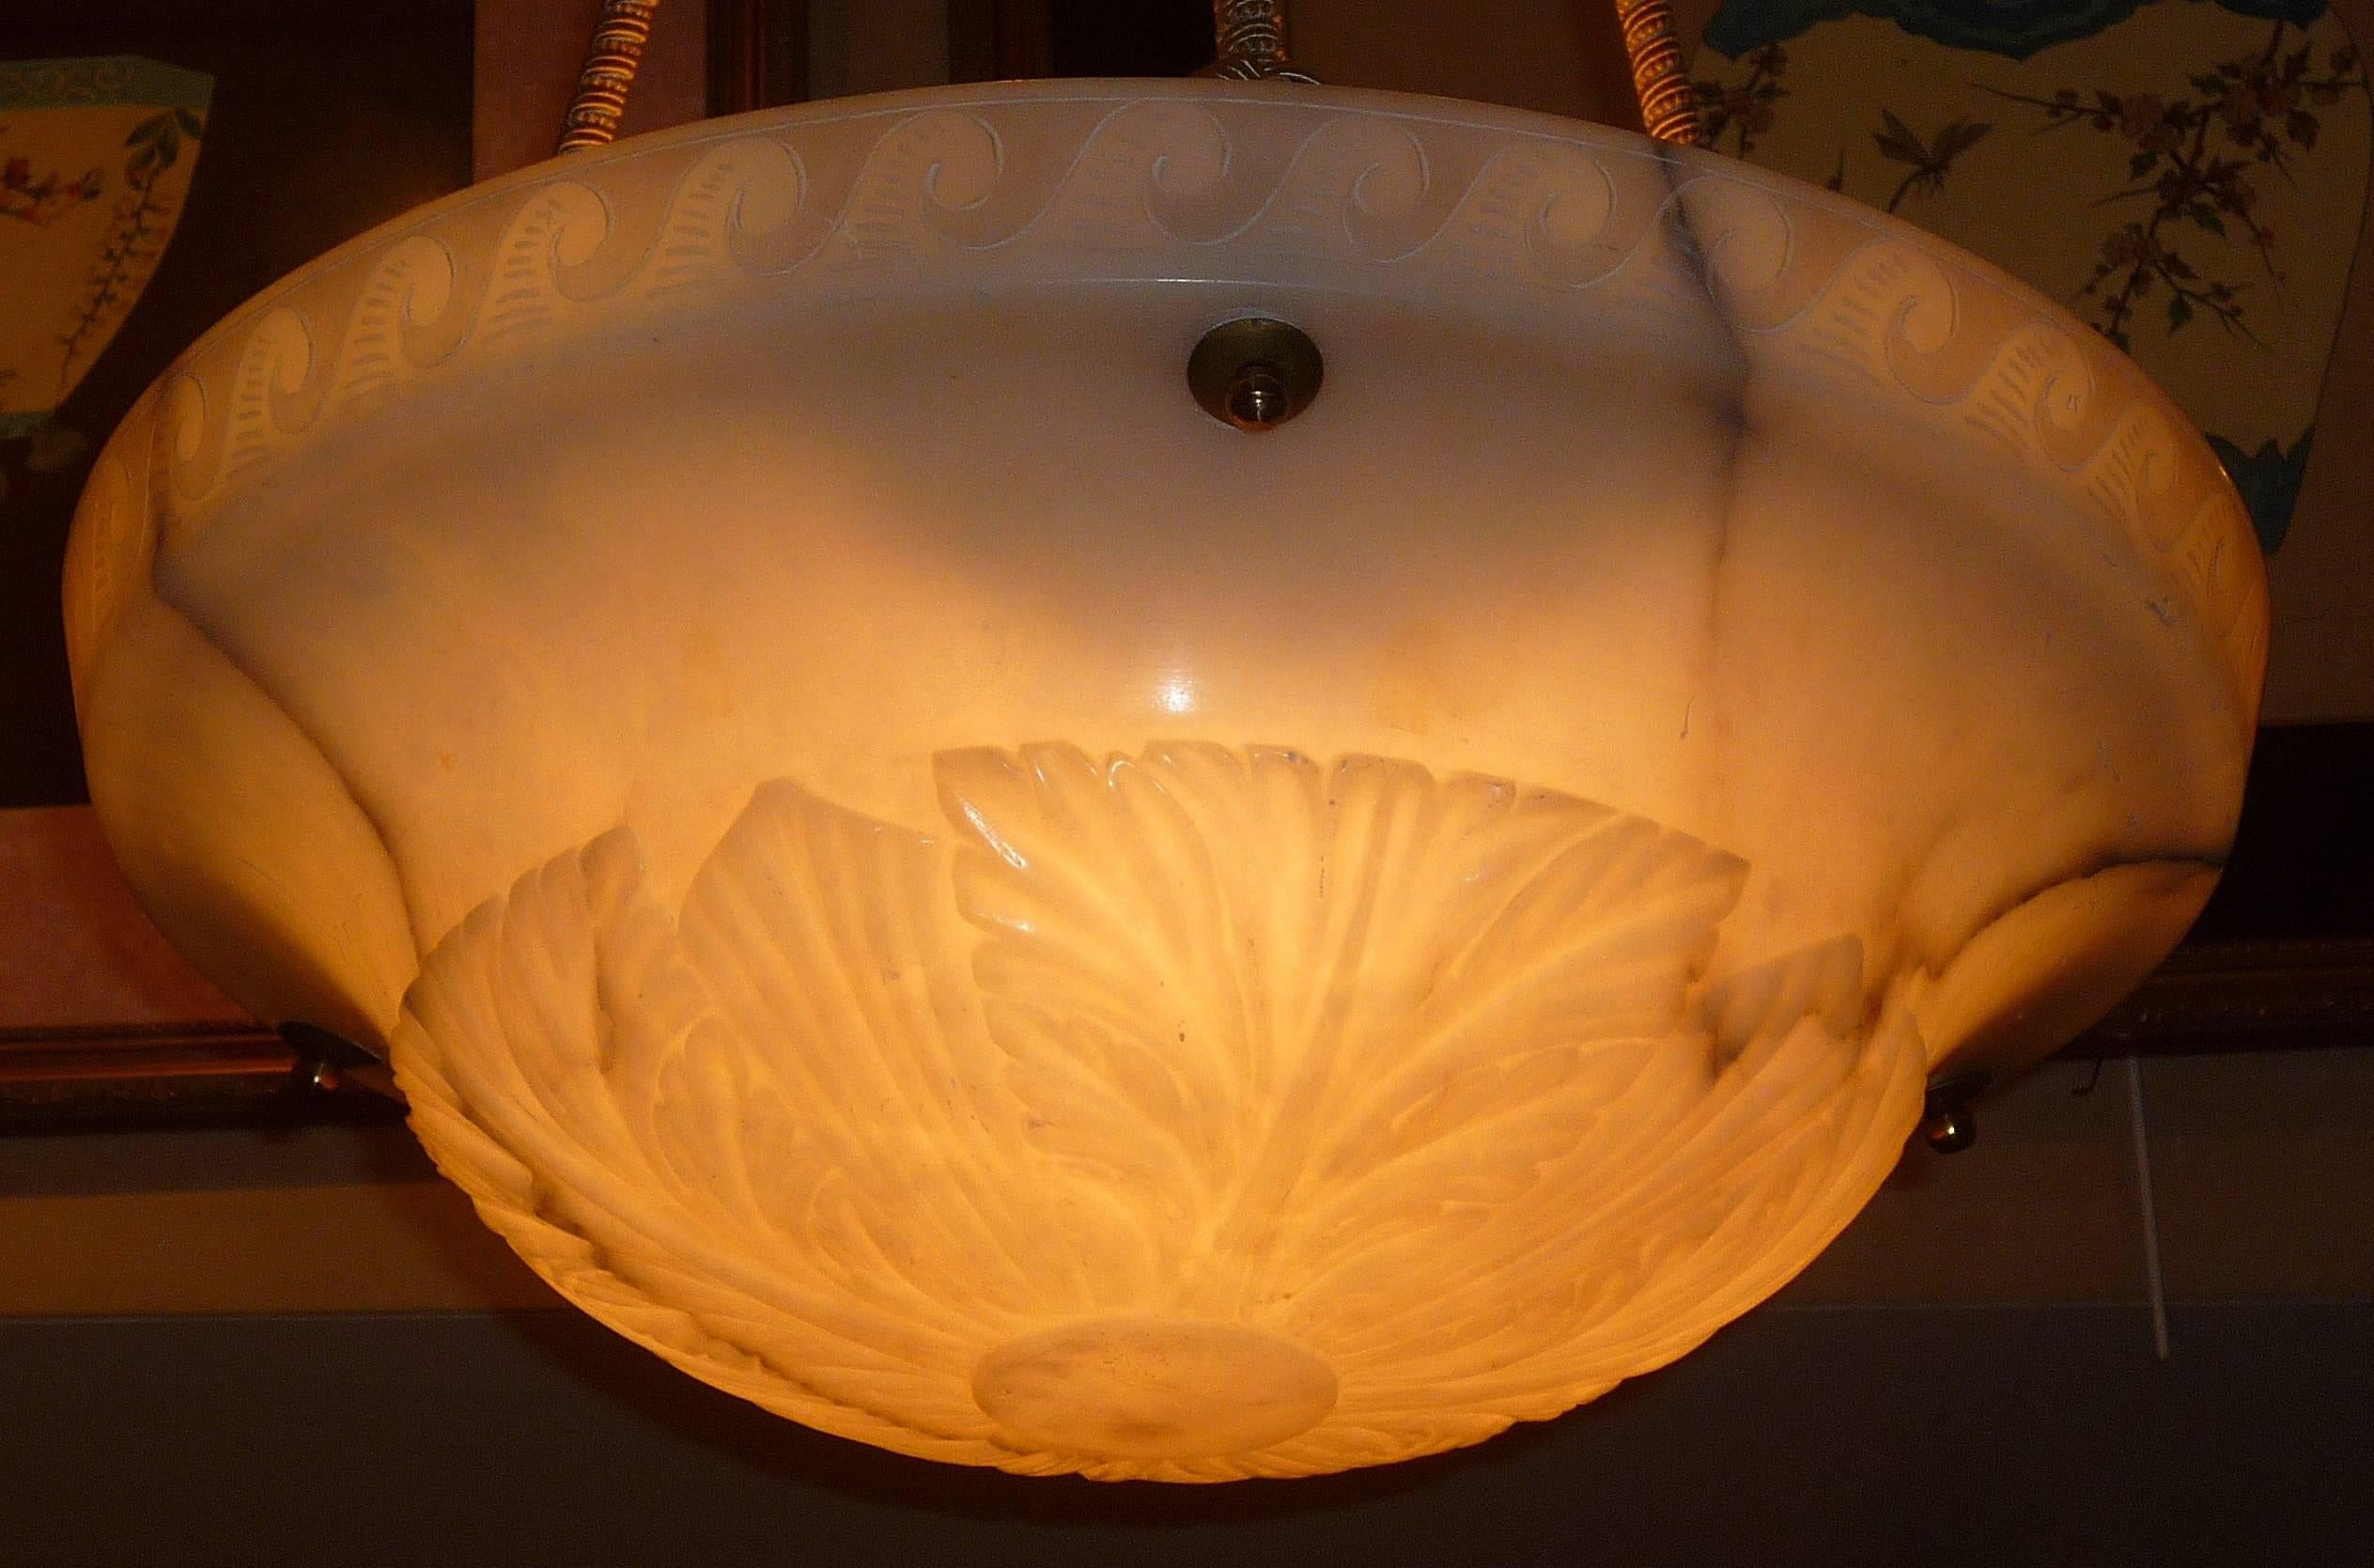 A French Art Deco period alabaster lighting fixture in the shape of a neoclassical coupe, with Greek key decor, circa 1925.